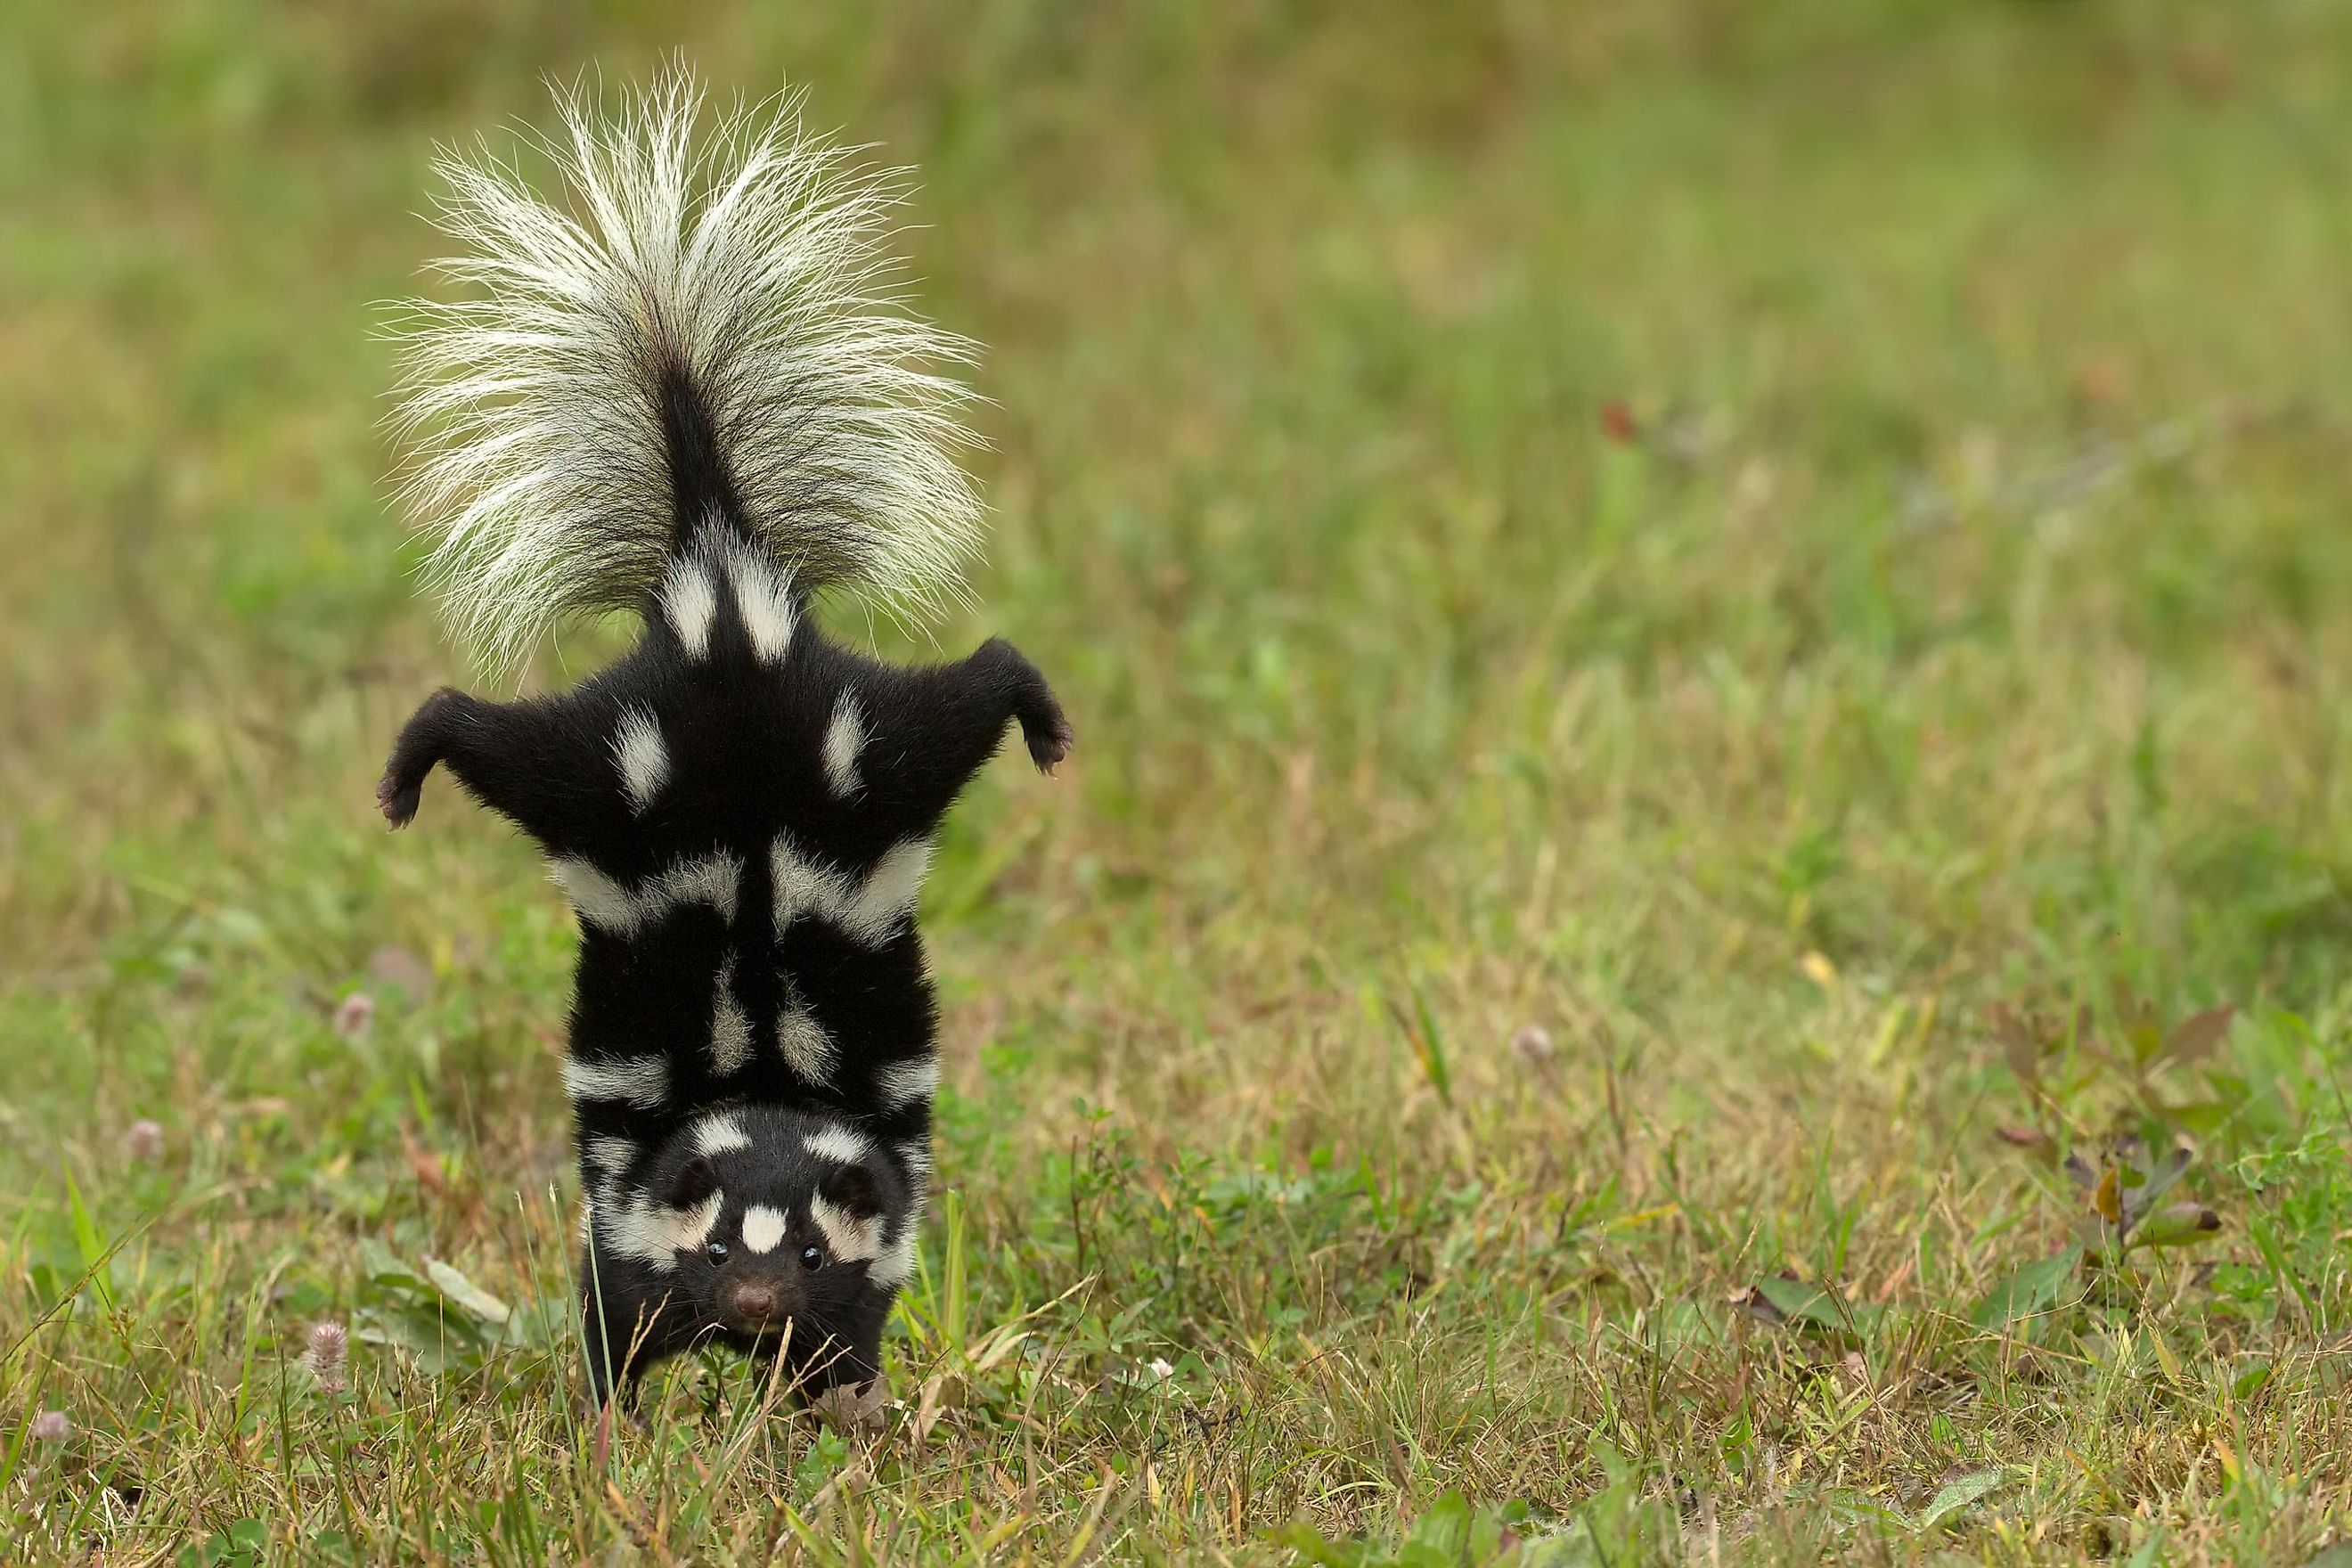 An adorable Eastern Spotted Skunk in an upside down position.